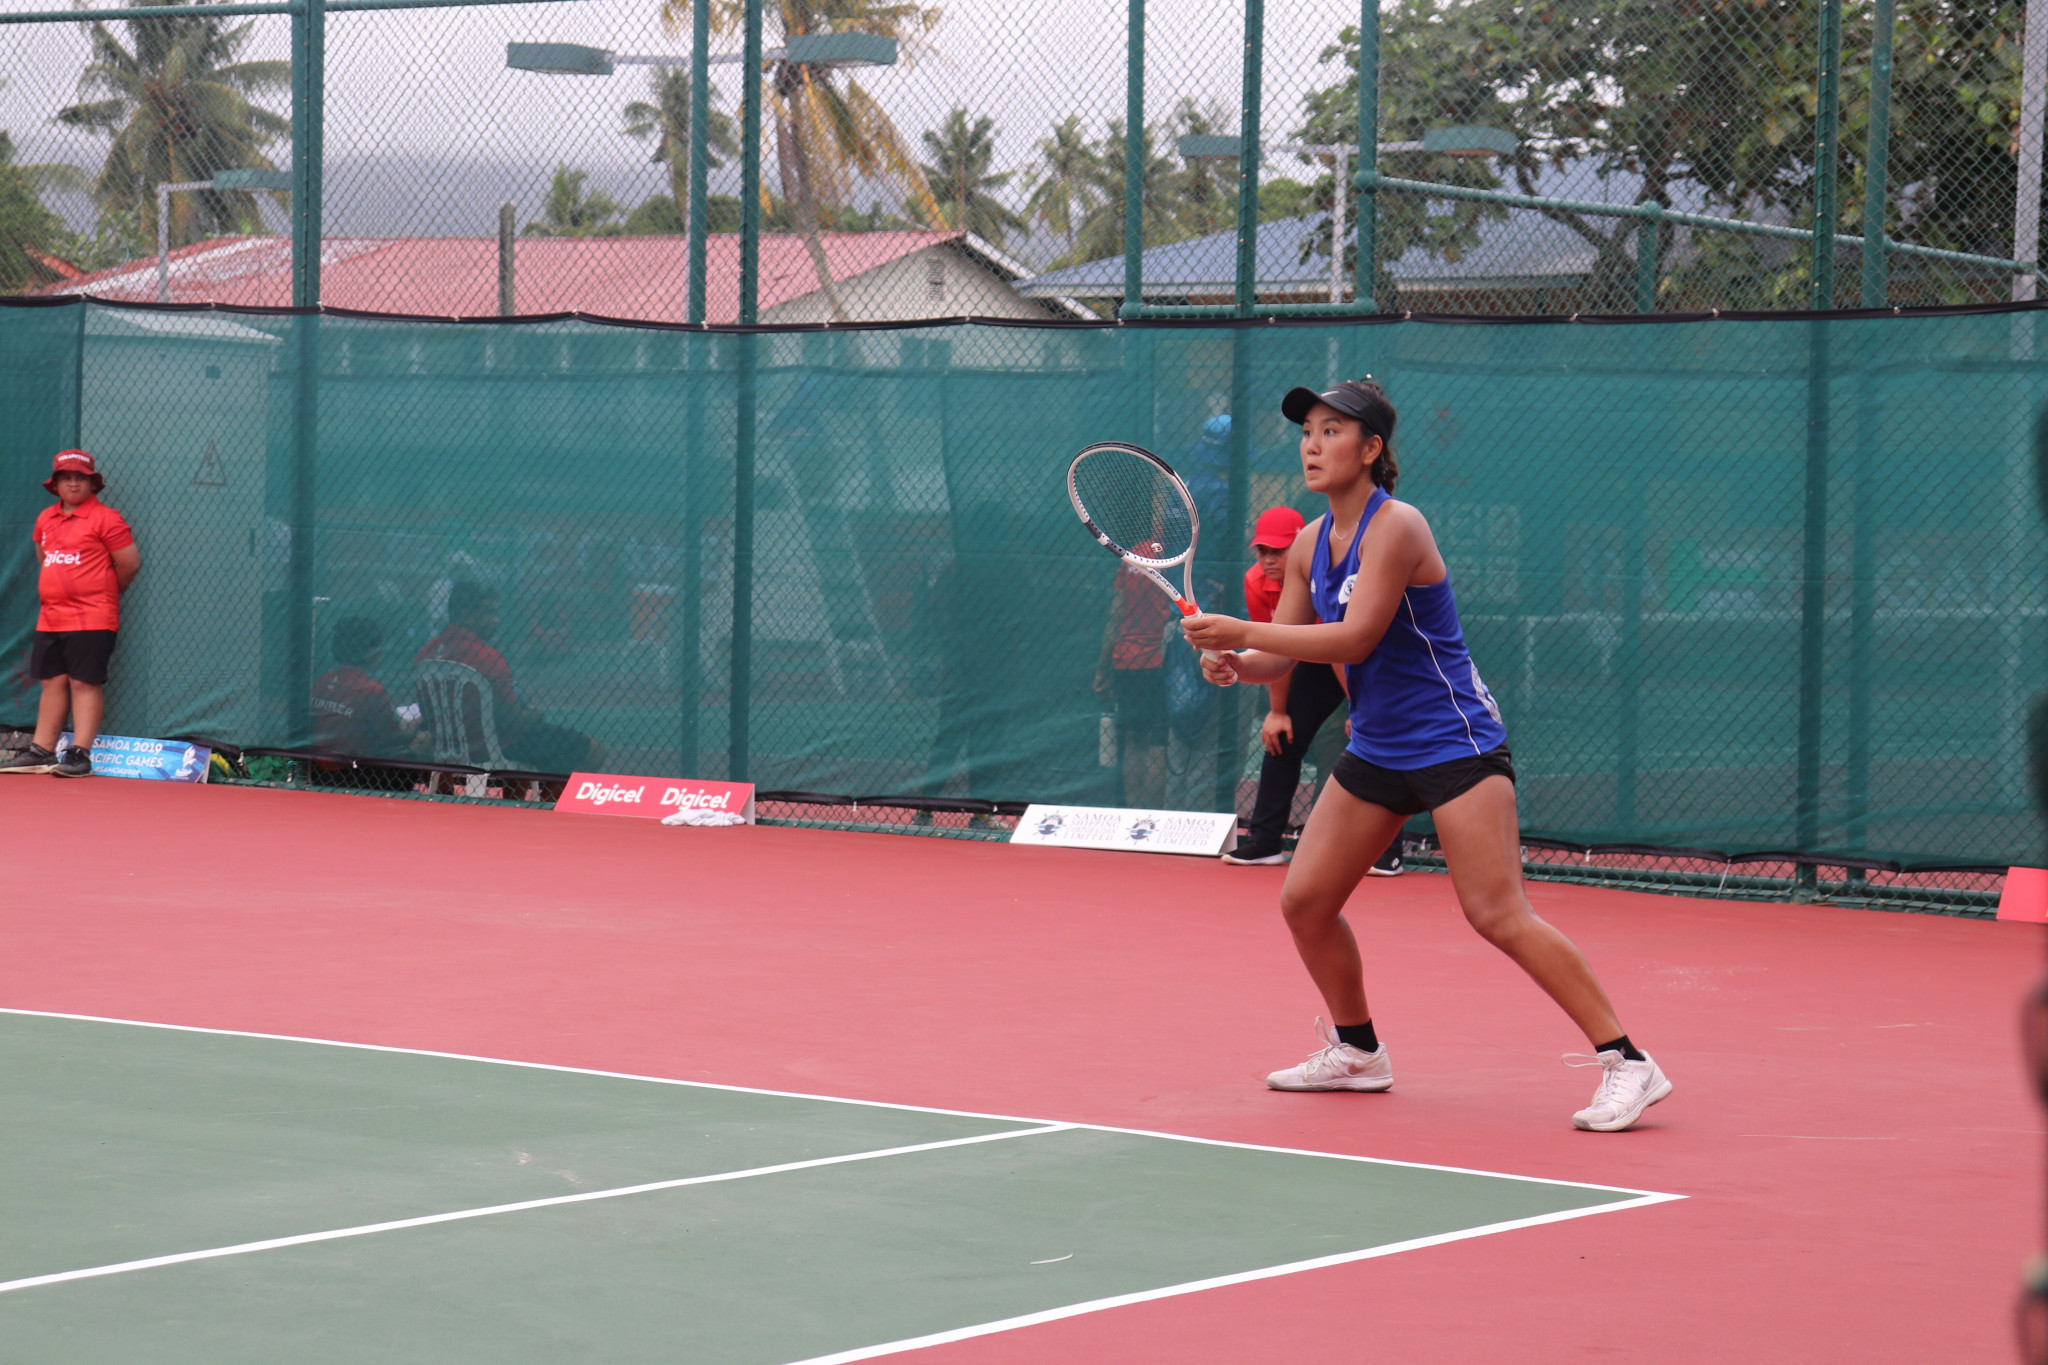 The courts at Apia Park are being used for the Games ©Samoa 2019